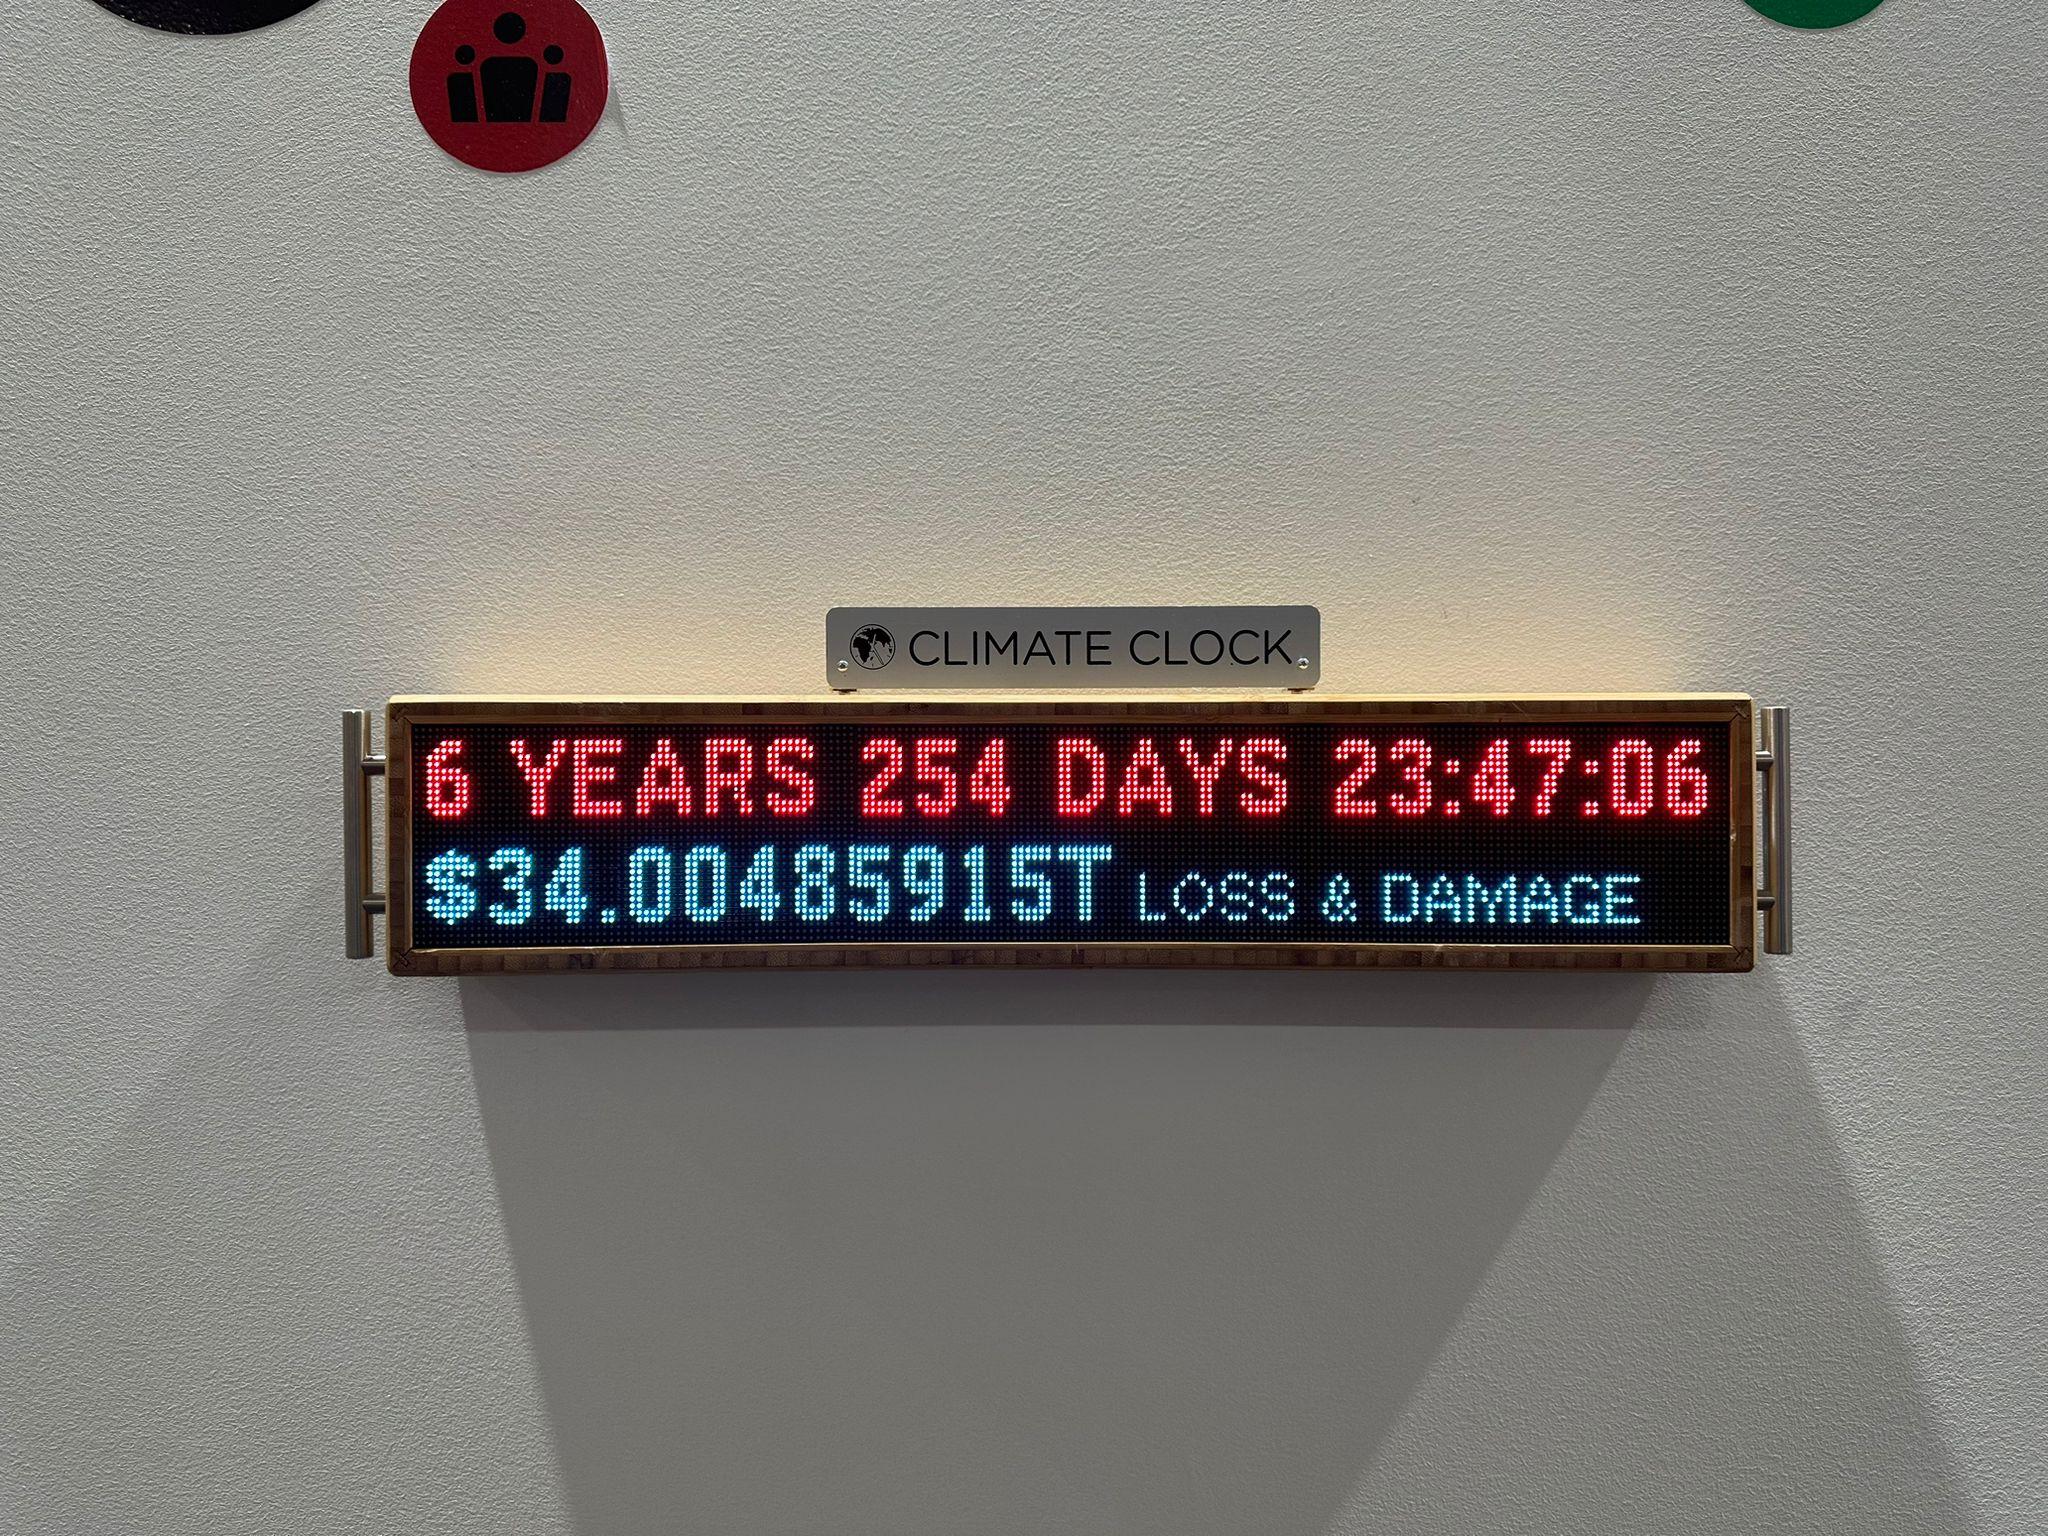 The climate clock at COP27 - climateclock.world